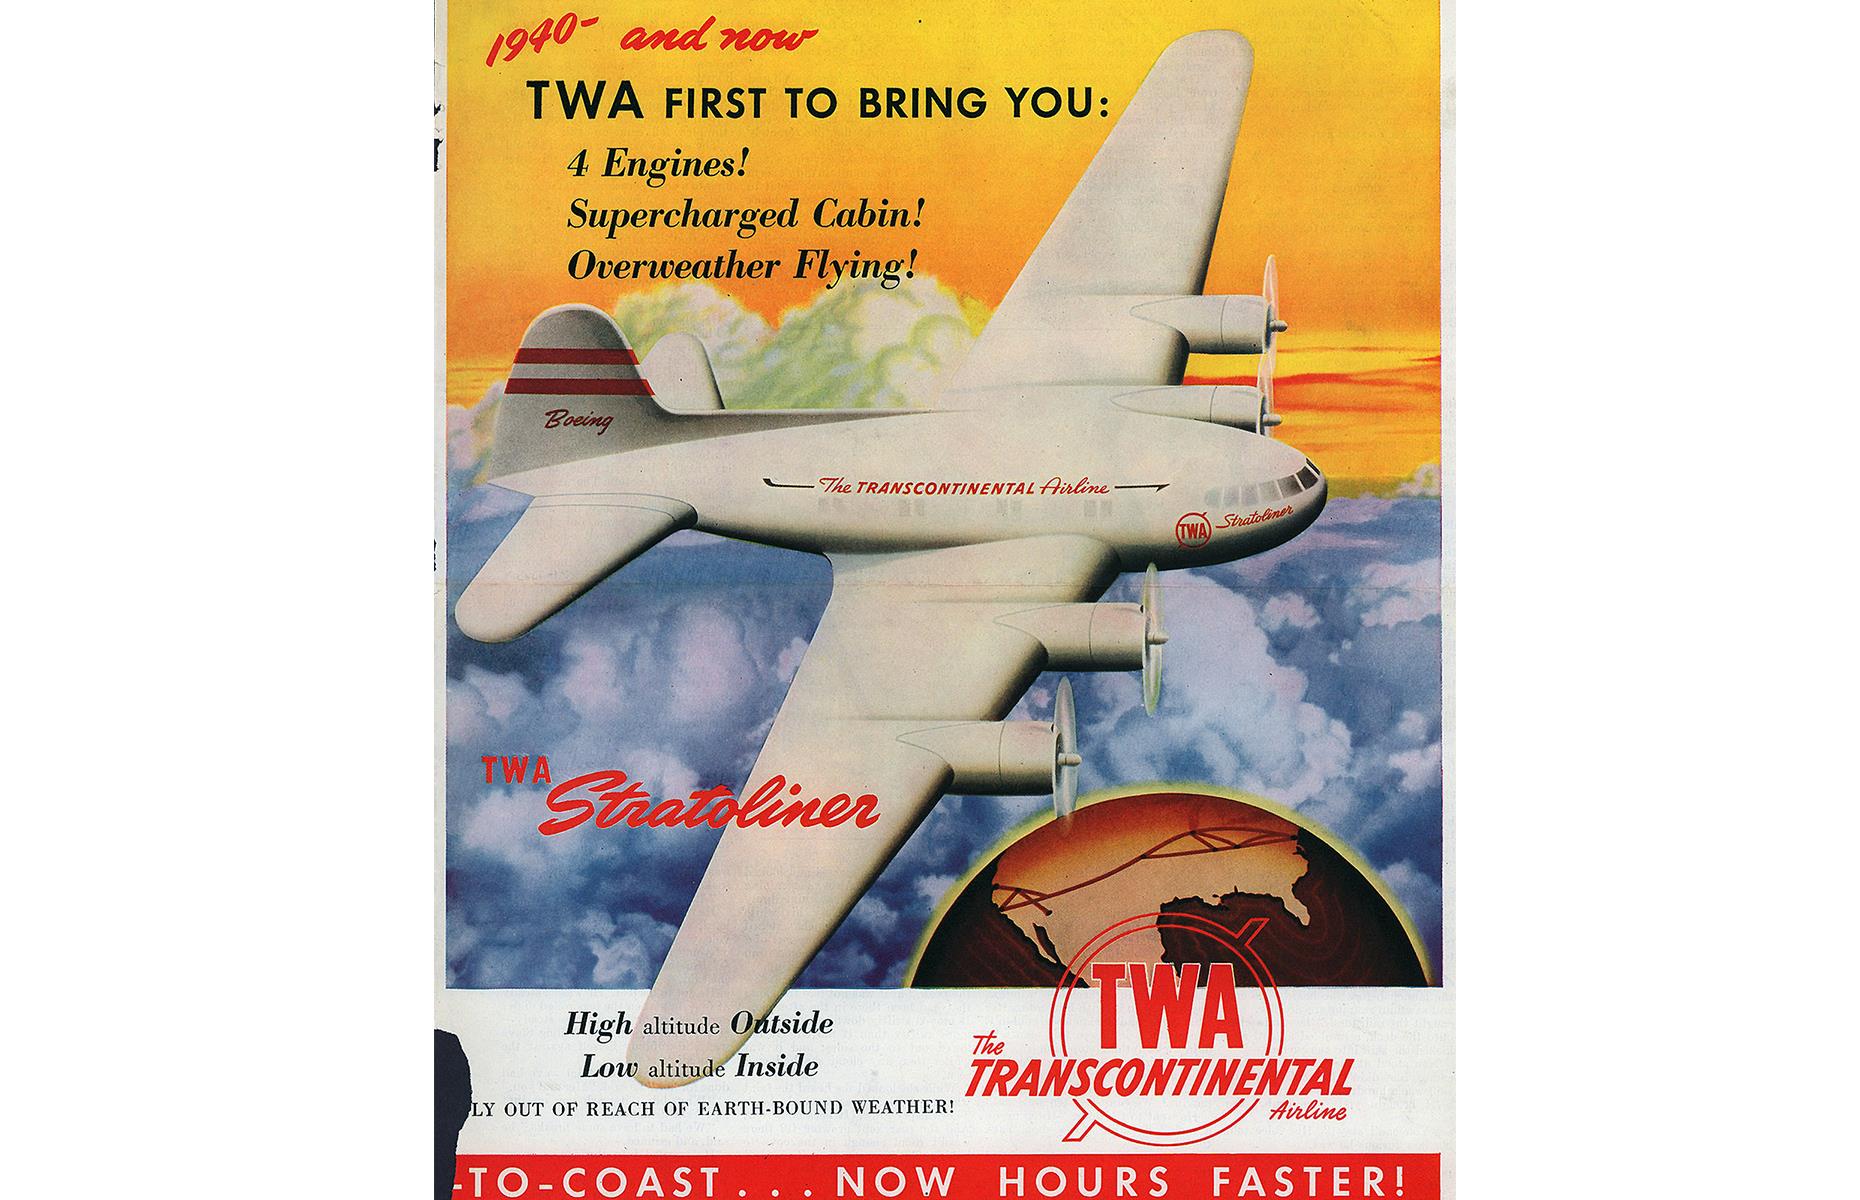 As competition increased towards the end of this decade, the major airlines ramped up their advertising. This TWA poster advertises the Boeing 307 Stratoliner, and promises a smooth ride as the aircraft glides above the clouds. The 1940s was ultimately the decade that preceded the so-called "golden age of travel".